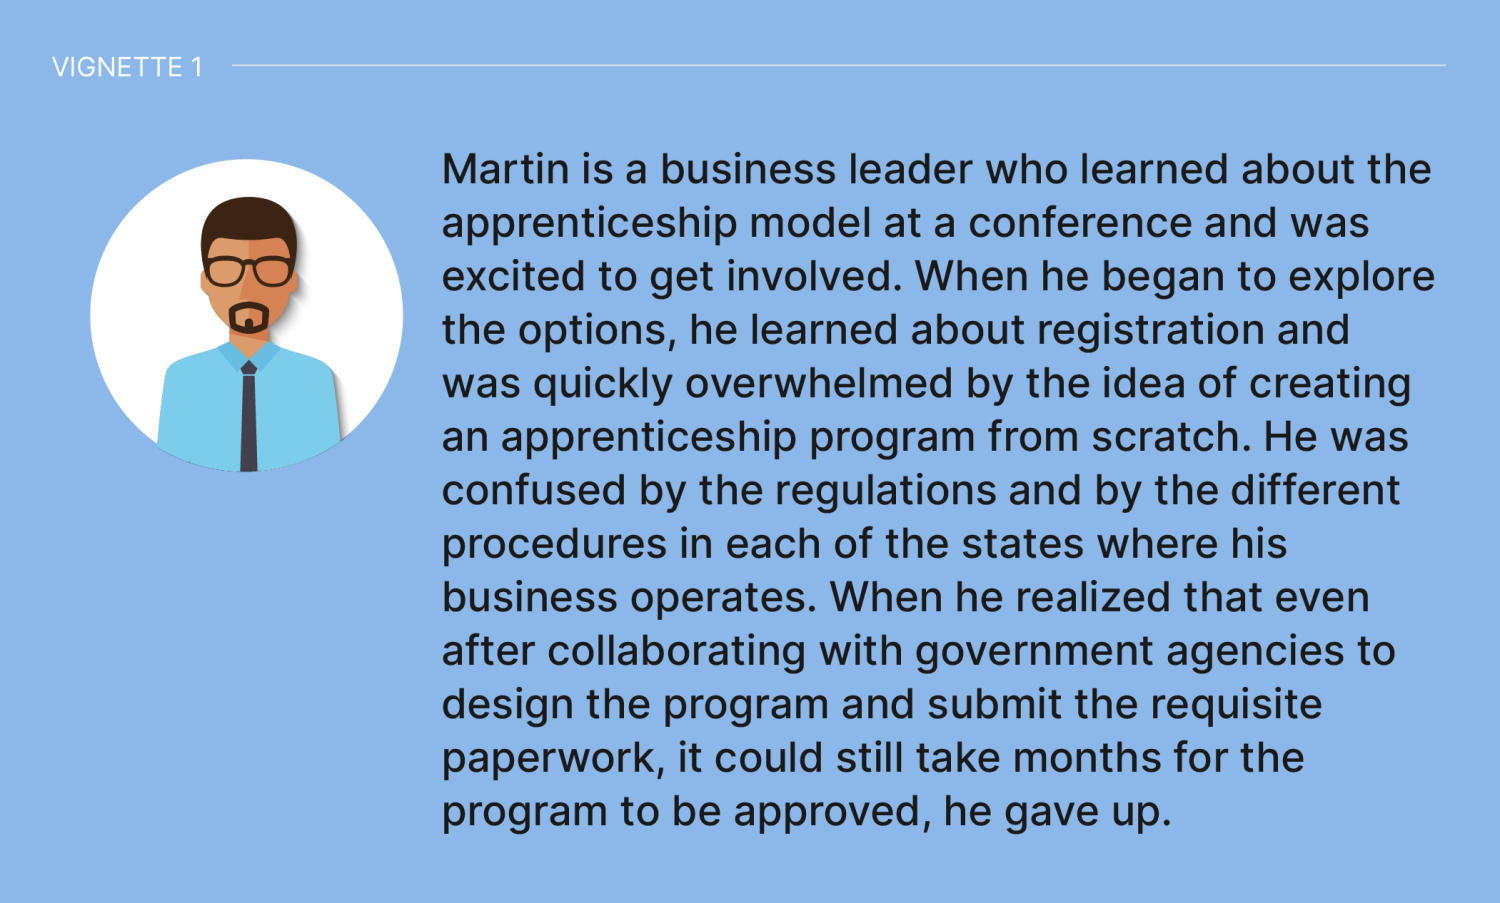 Vignette 1: Martin is a business leader who learned about the apprenticeship model at a conference and was excited to get involved. When he began to explore the options, he learned about registration and was quickly overwhelmed by the idea of creating an apprenticeship program from scratch. He was confused by the regulations and by the different procedures in each of the states where his business operates. When he realized that even after collaborating with government agencies to design the program and submit the requisite paperwork, it could still take months for the program to be approved, he gave up.